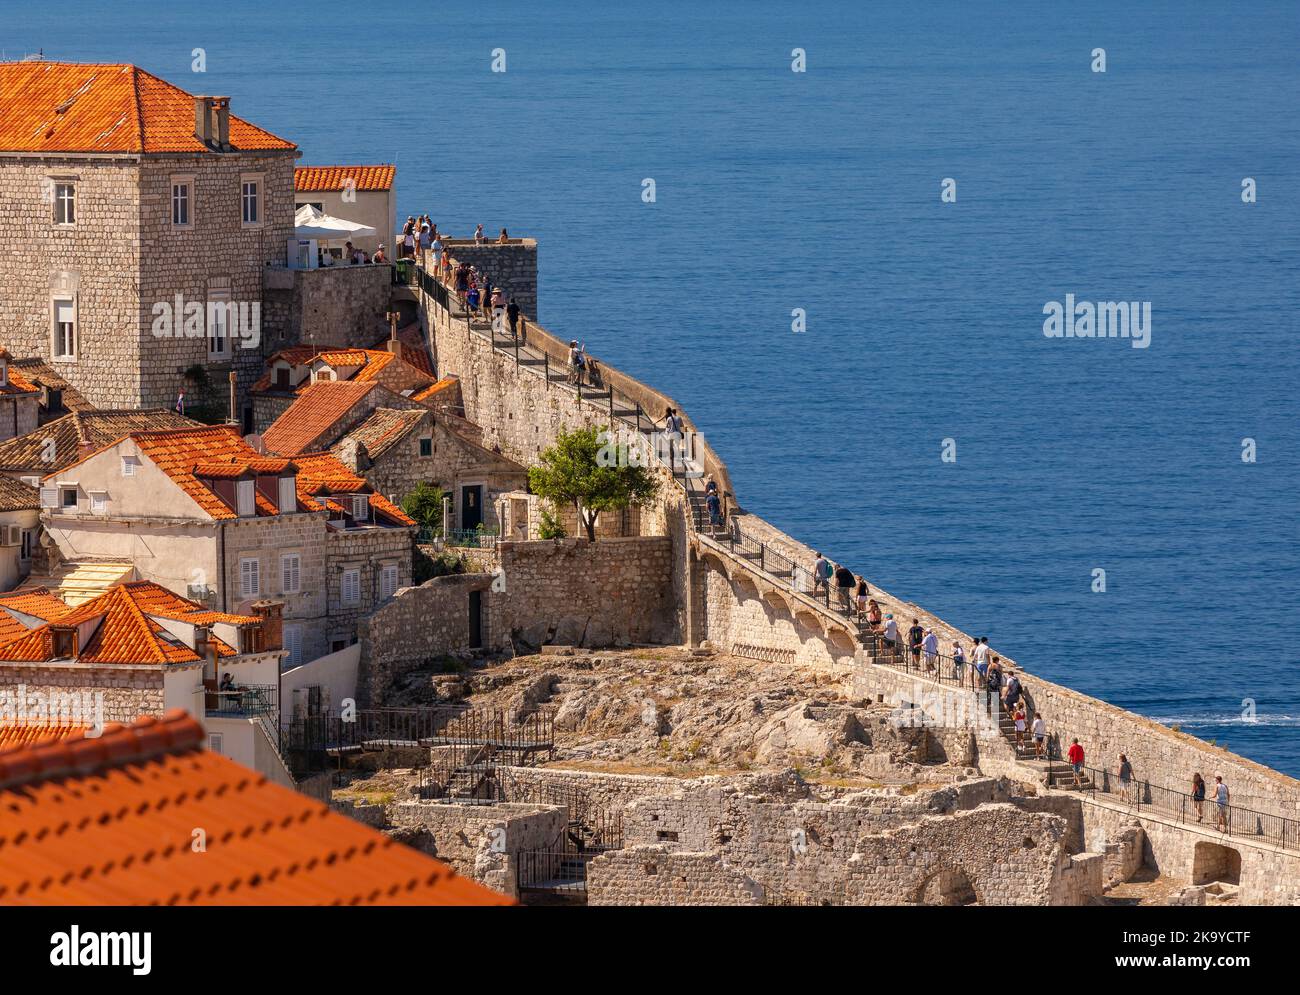 DUBROVNIK, CROATIA, EUROPE - Tourists walk the wall in fortress city of Dubrovnik on the Dalmation coast. Stock Photo